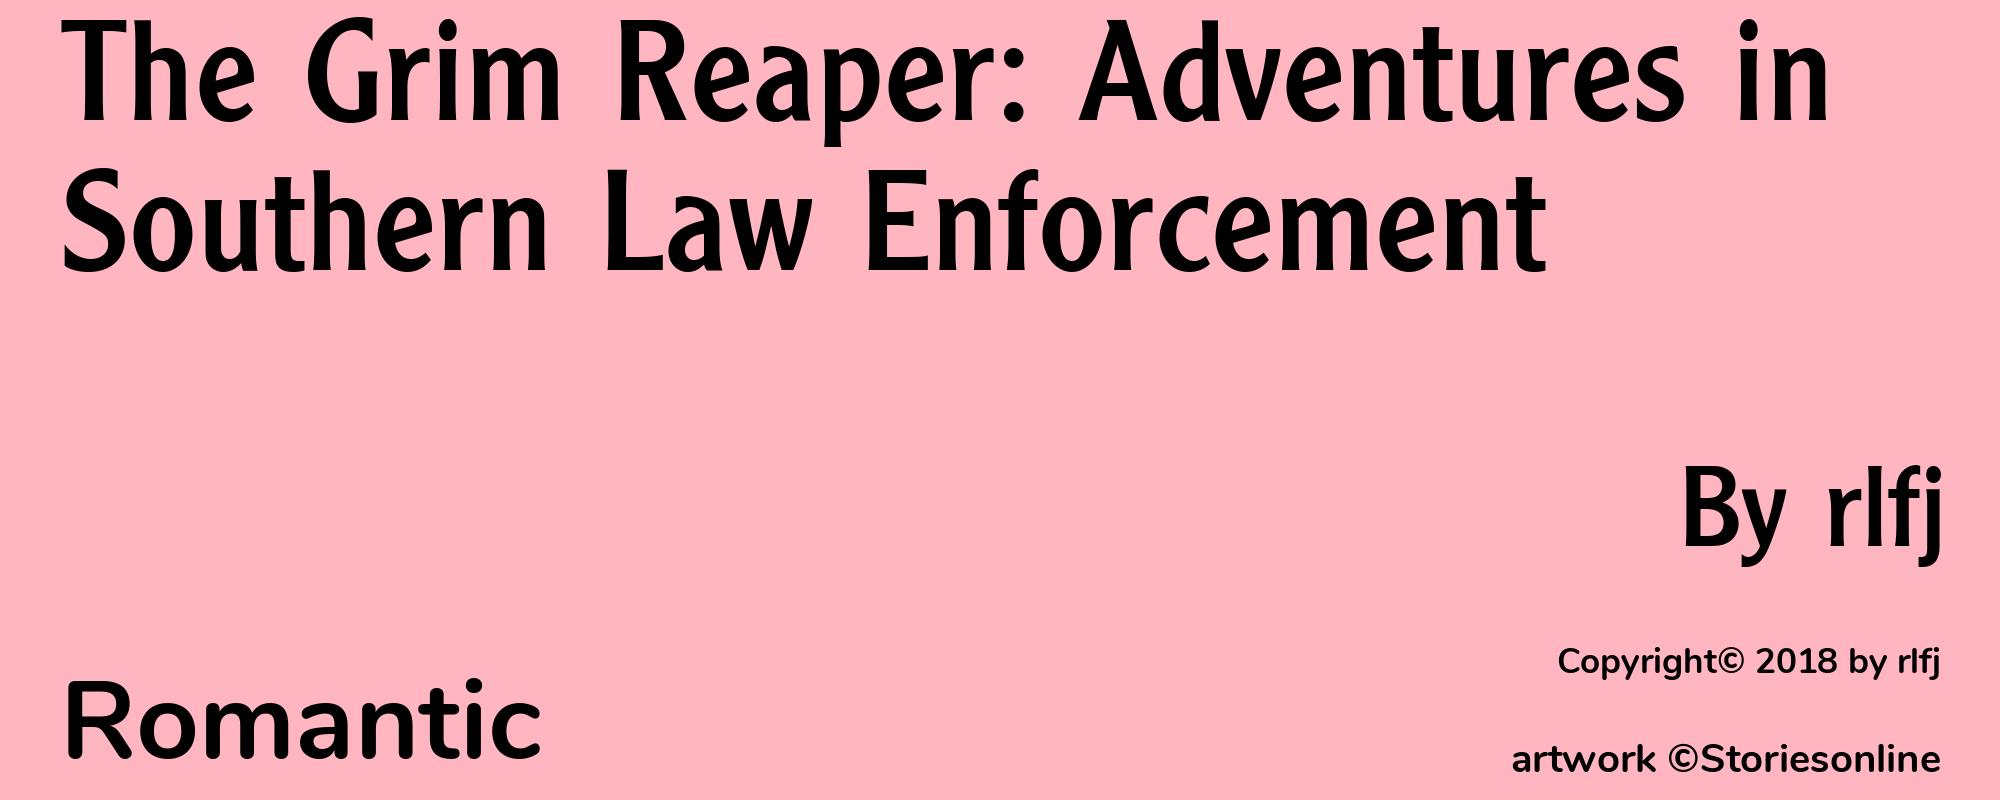 The Grim Reaper: Adventures in Southern Law Enforcement - Cover